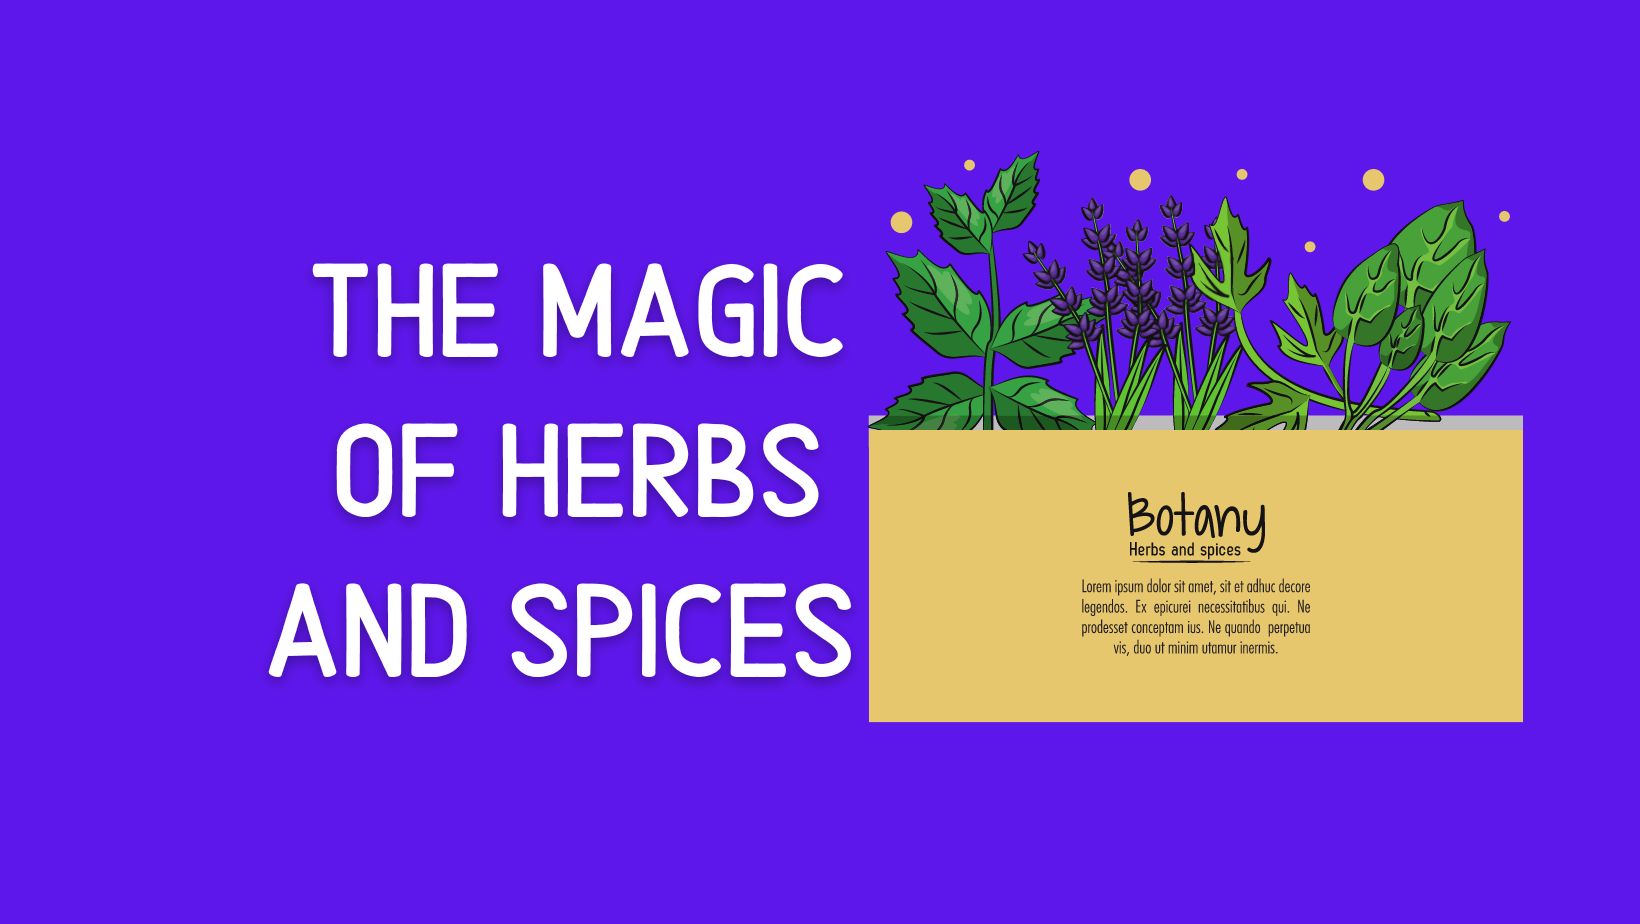 The Magic of Herbs and Spices